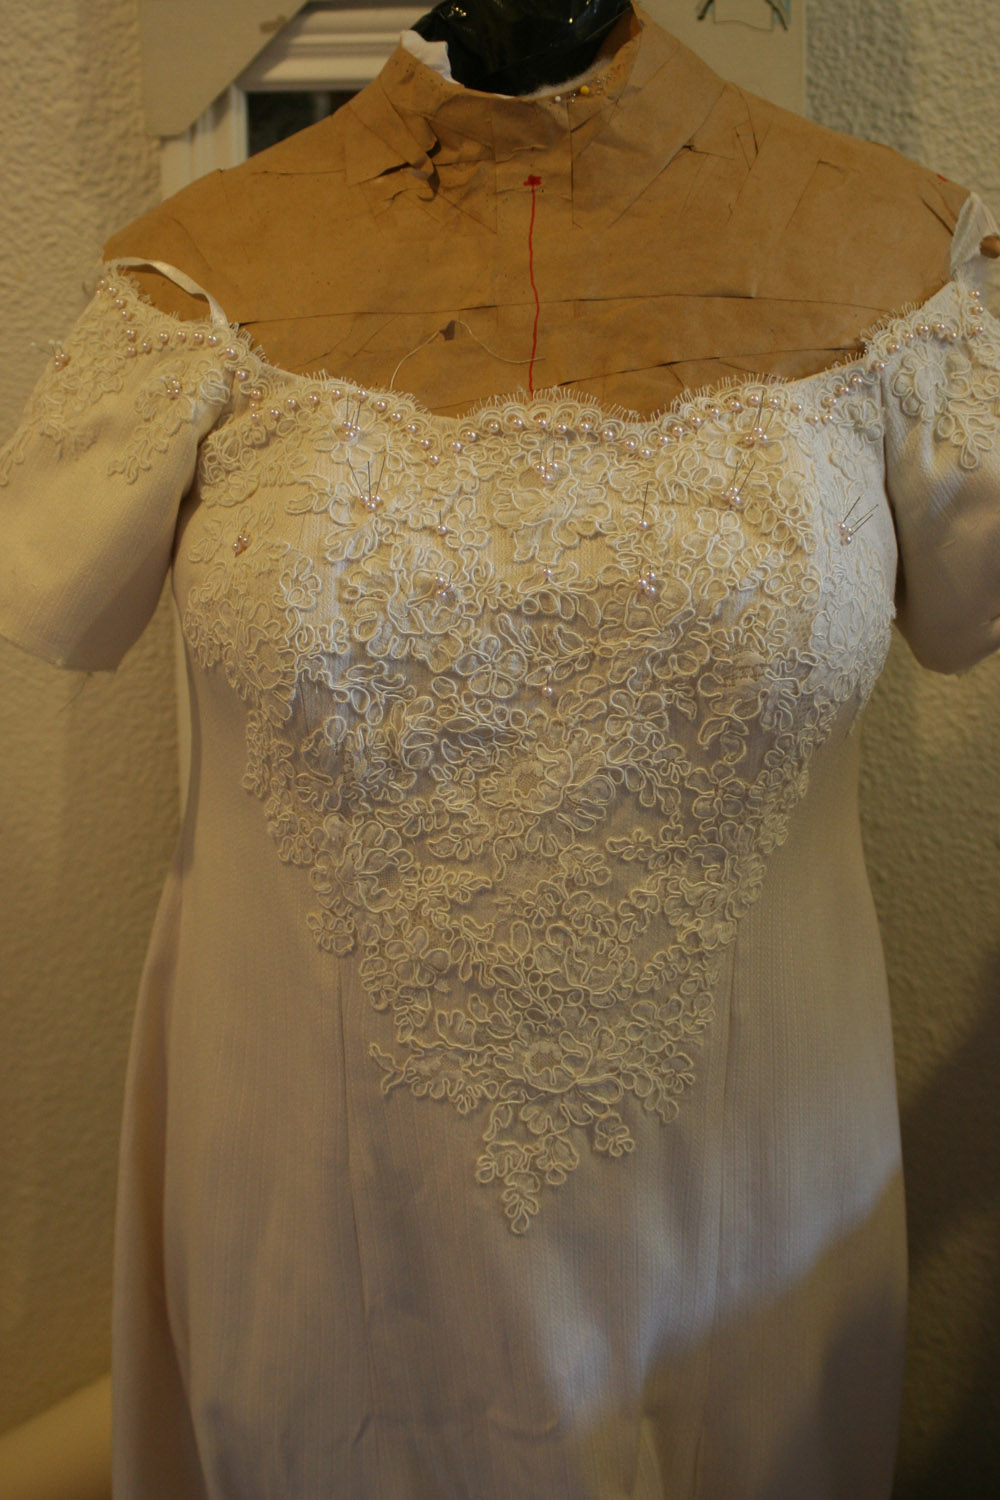 An interim view of the wedding dress, with pearls and lace still in the design stages.